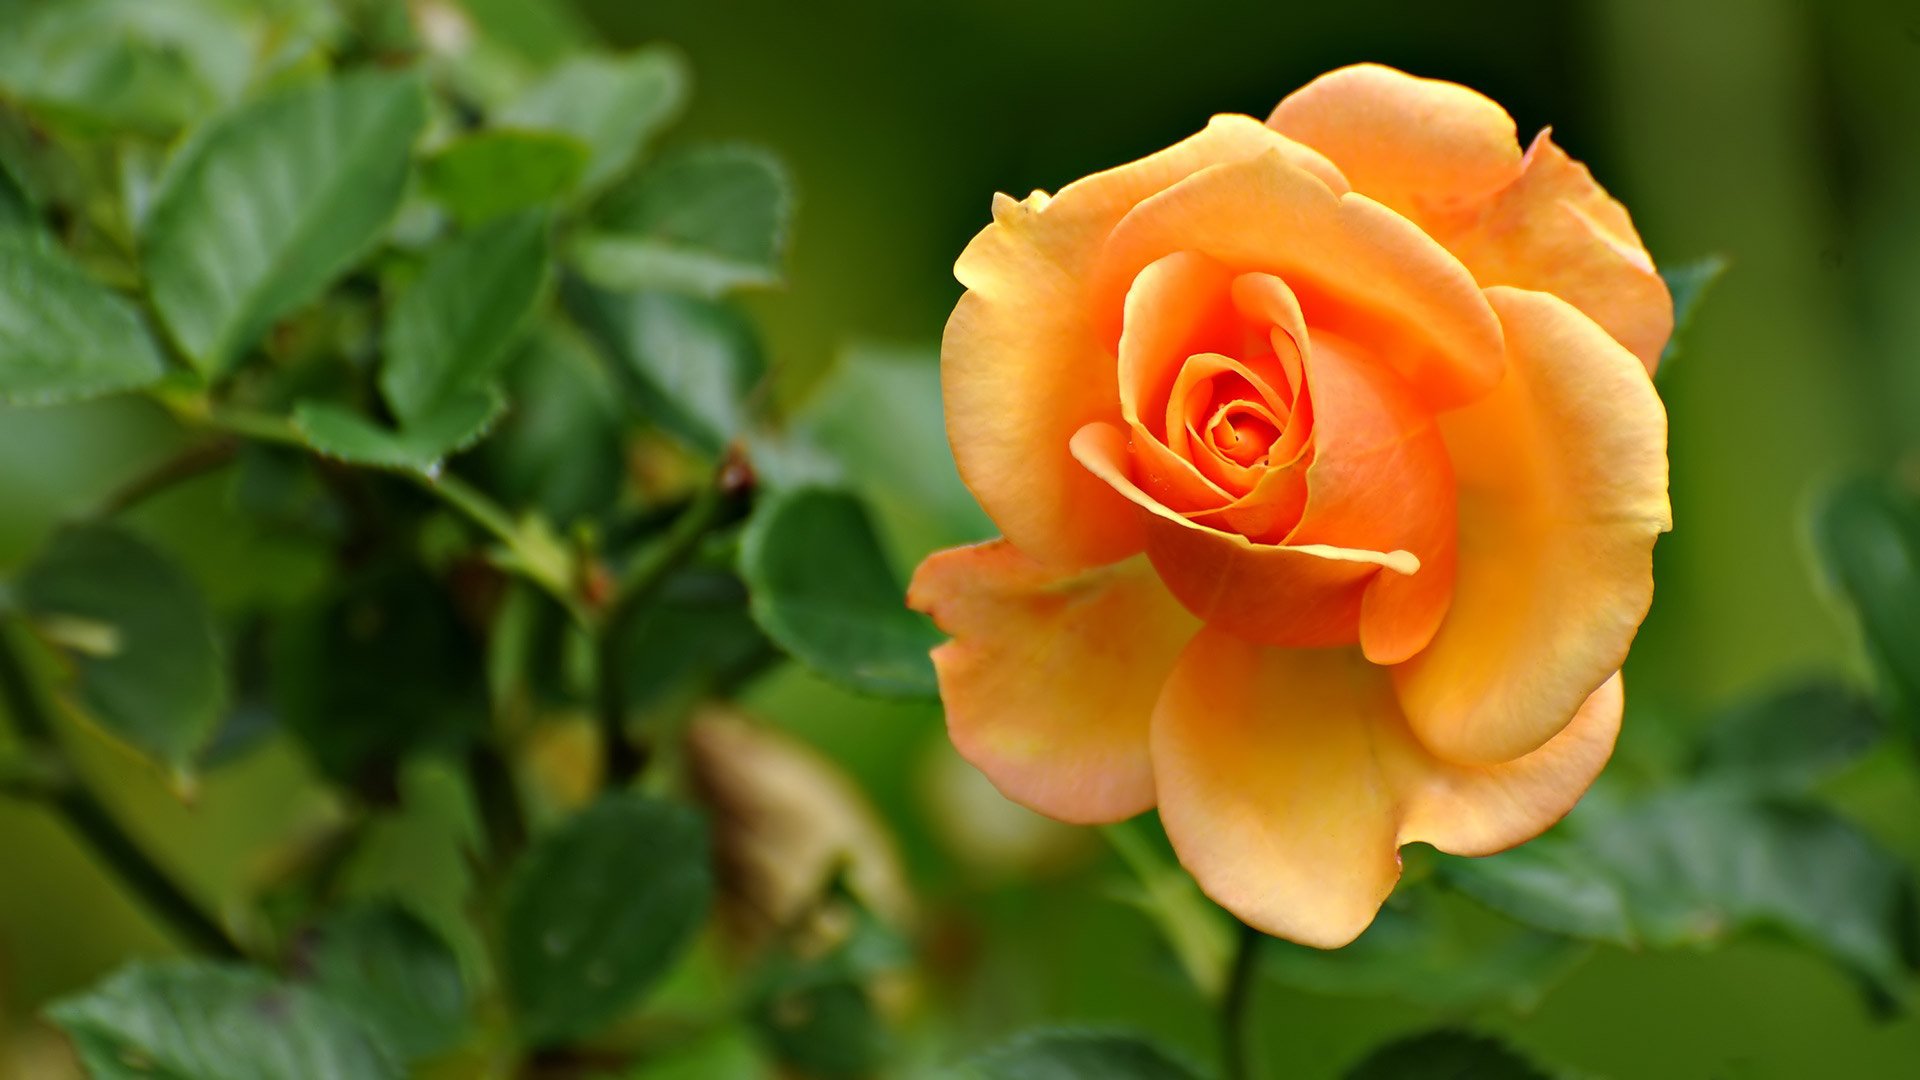 Rose HD Wallpaper by C.Knight